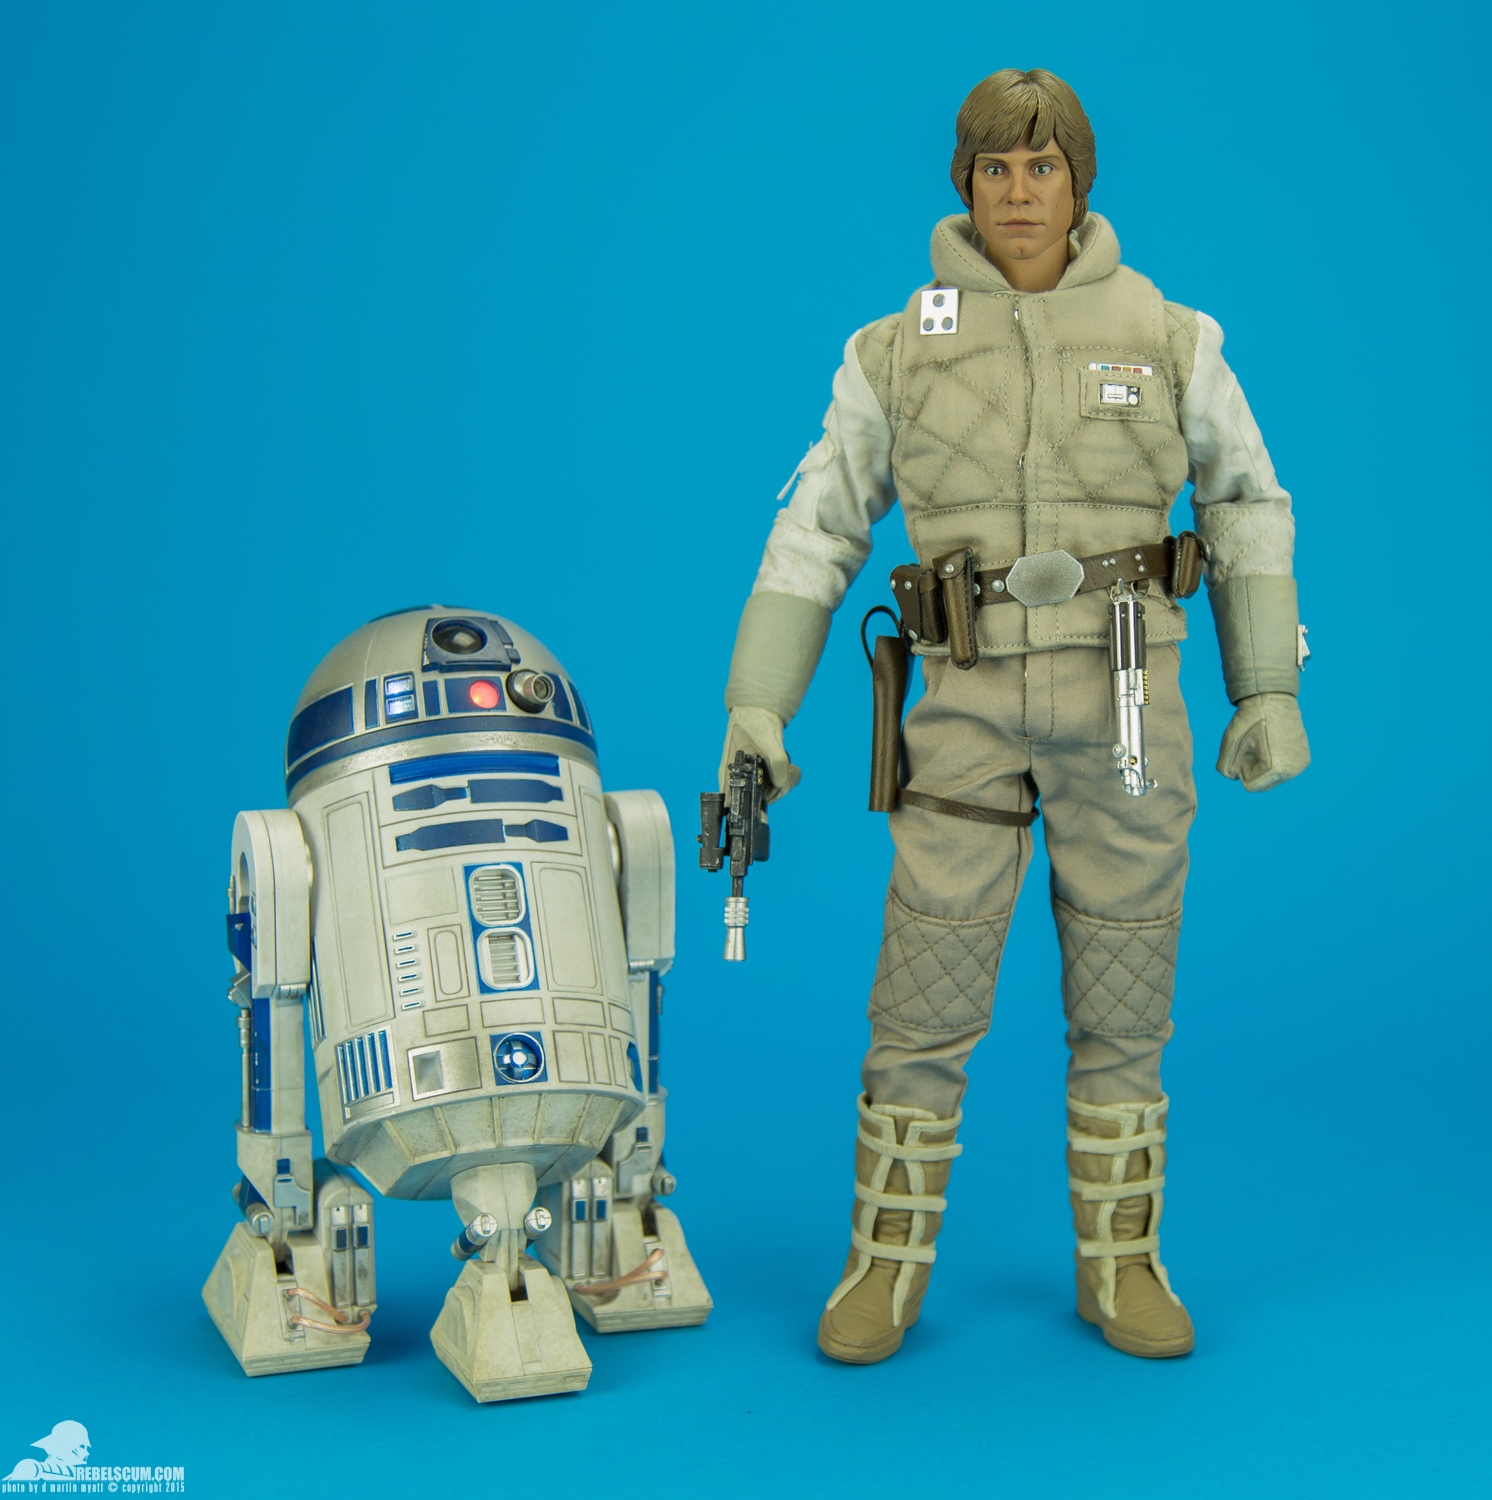 Luke-Skywalker-Hoth-Sixth-Scale-Sideshow-Collectibles-Star-Wars-045.jpg